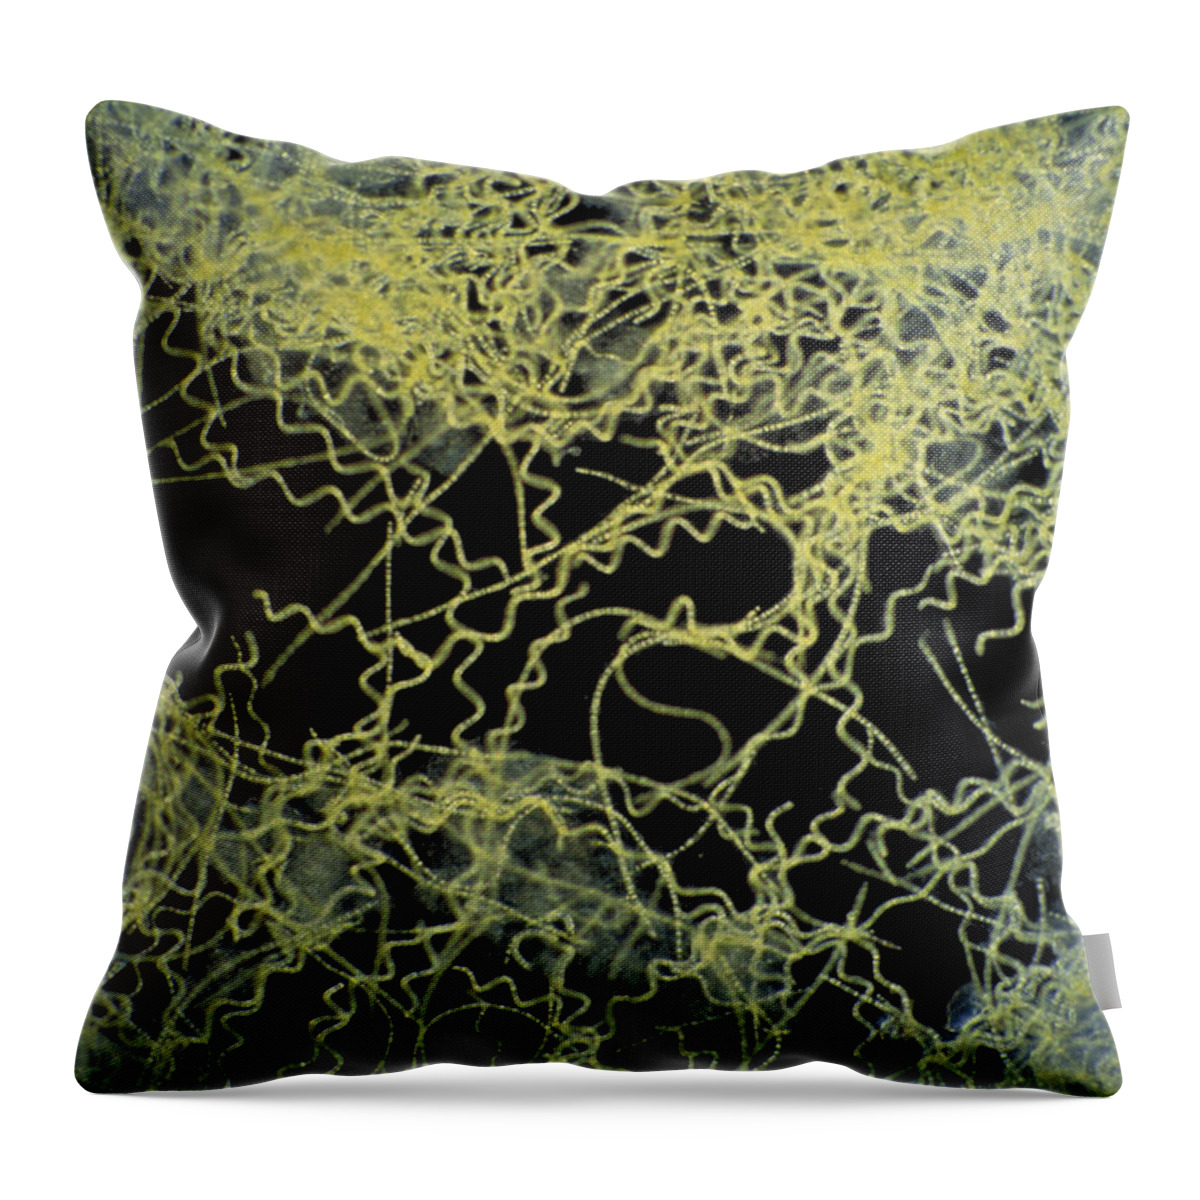 Algae Throw Pillow featuring the photograph Spirulina Platensis Algae by Michael Abbey